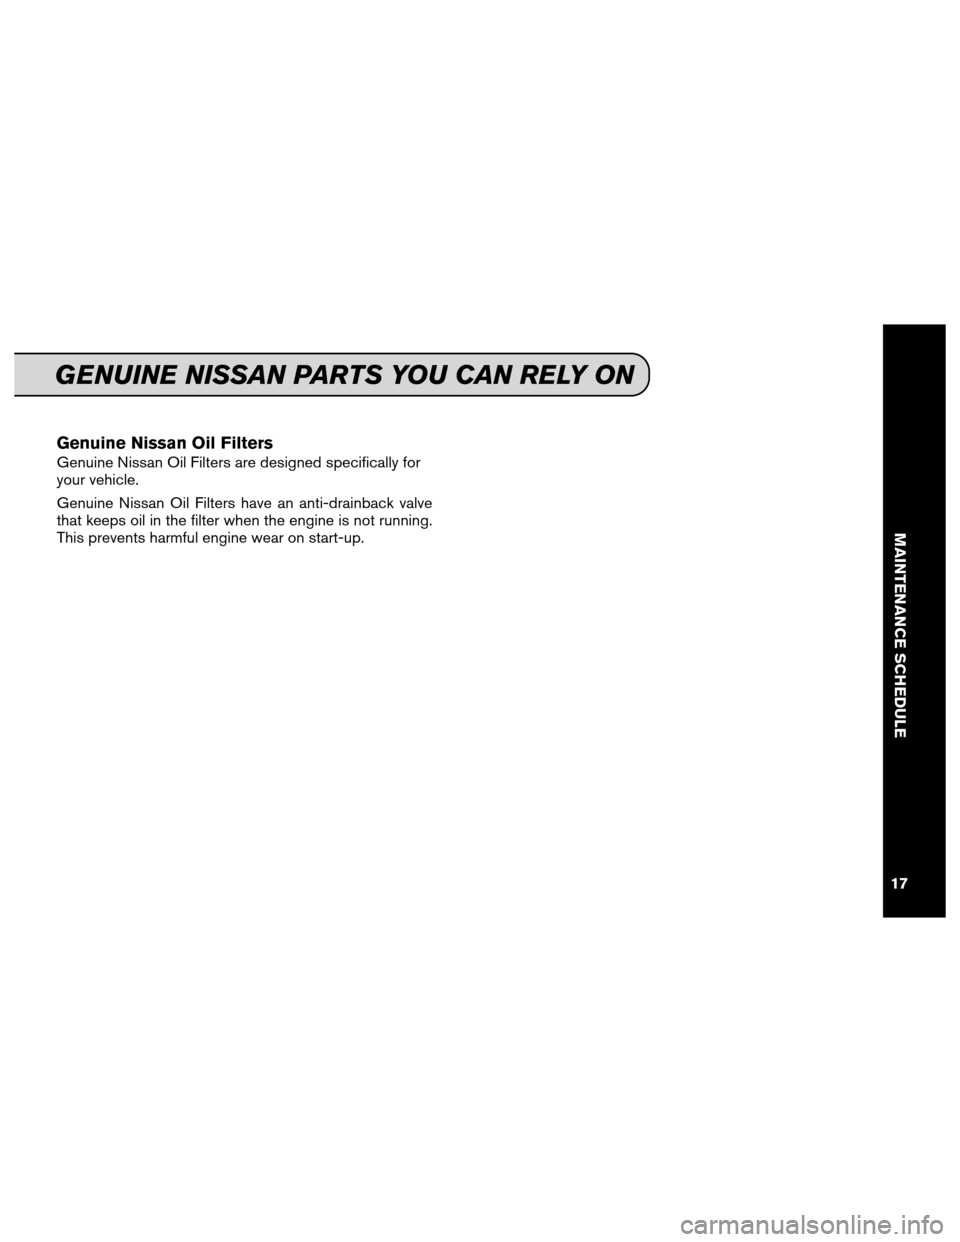 NISSAN 370Z COUPE 2013 Z34 Service And Maintenance Guide Genuine Nissan Oil Filters
Genuine Nissan Oil Filters are designed specifically for
your vehicle.
Genuine Nissan Oil Filters have an anti-drainback valve
that keeps oil in the filter when the engine i